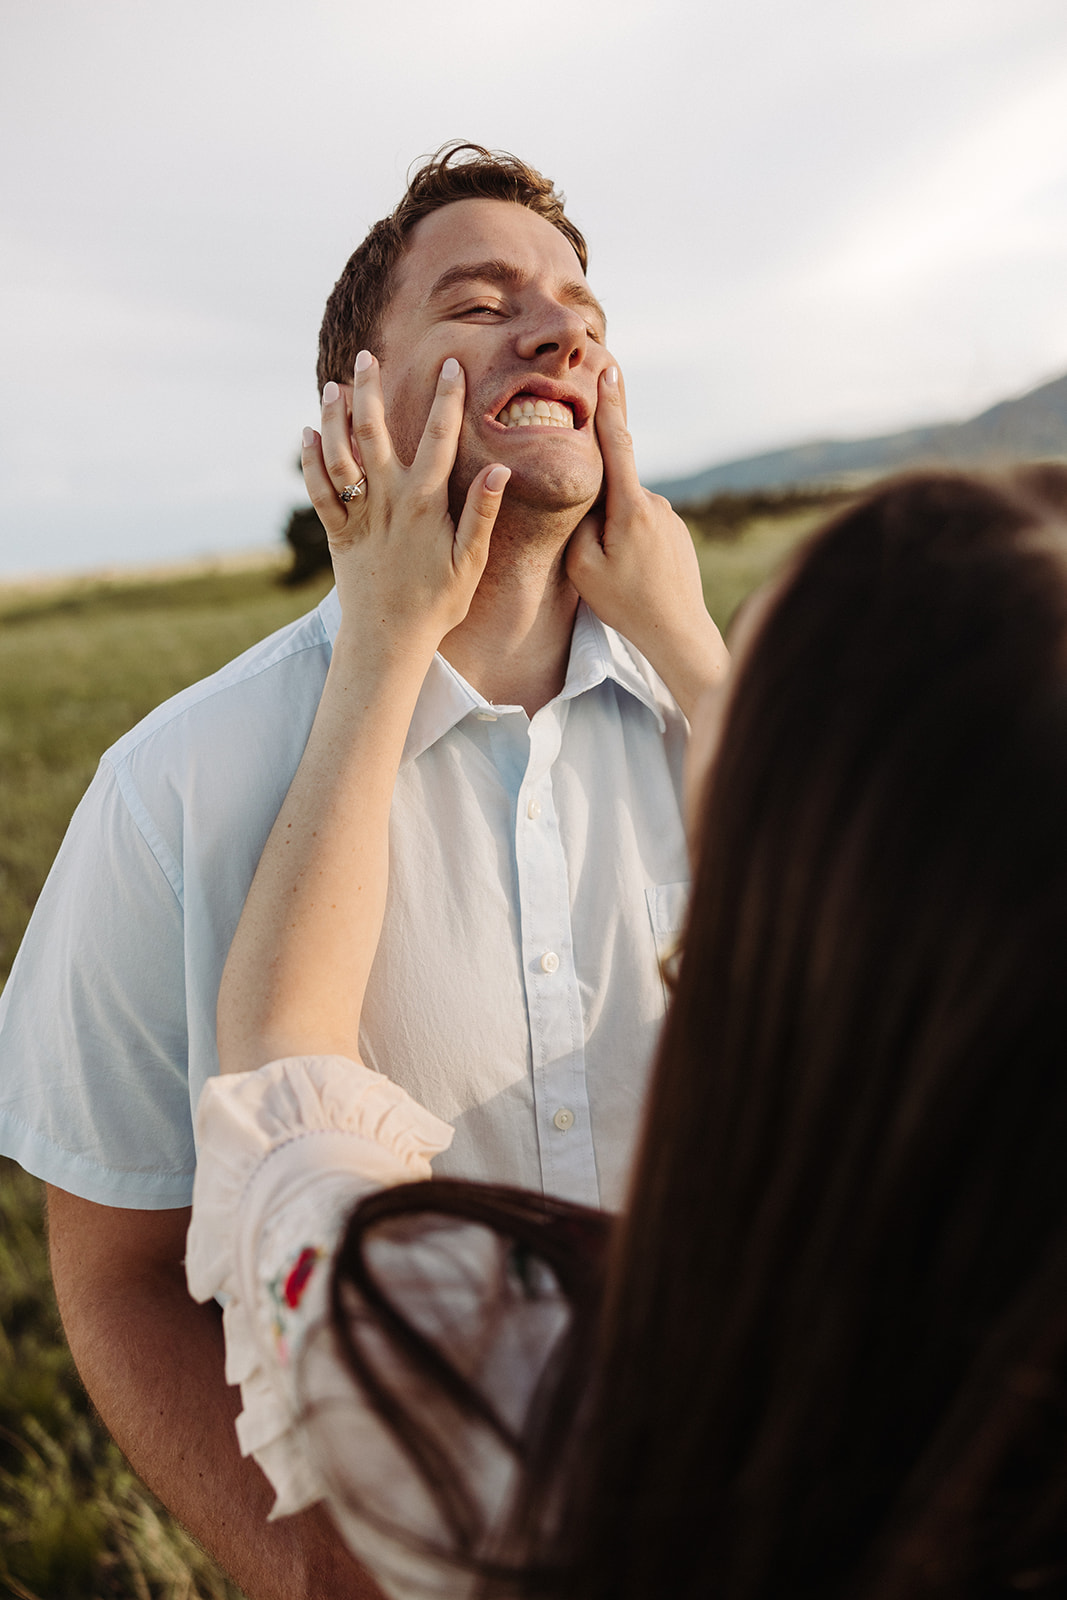 Woman holds her fiance's face as he stretches out his smile, making a silly face